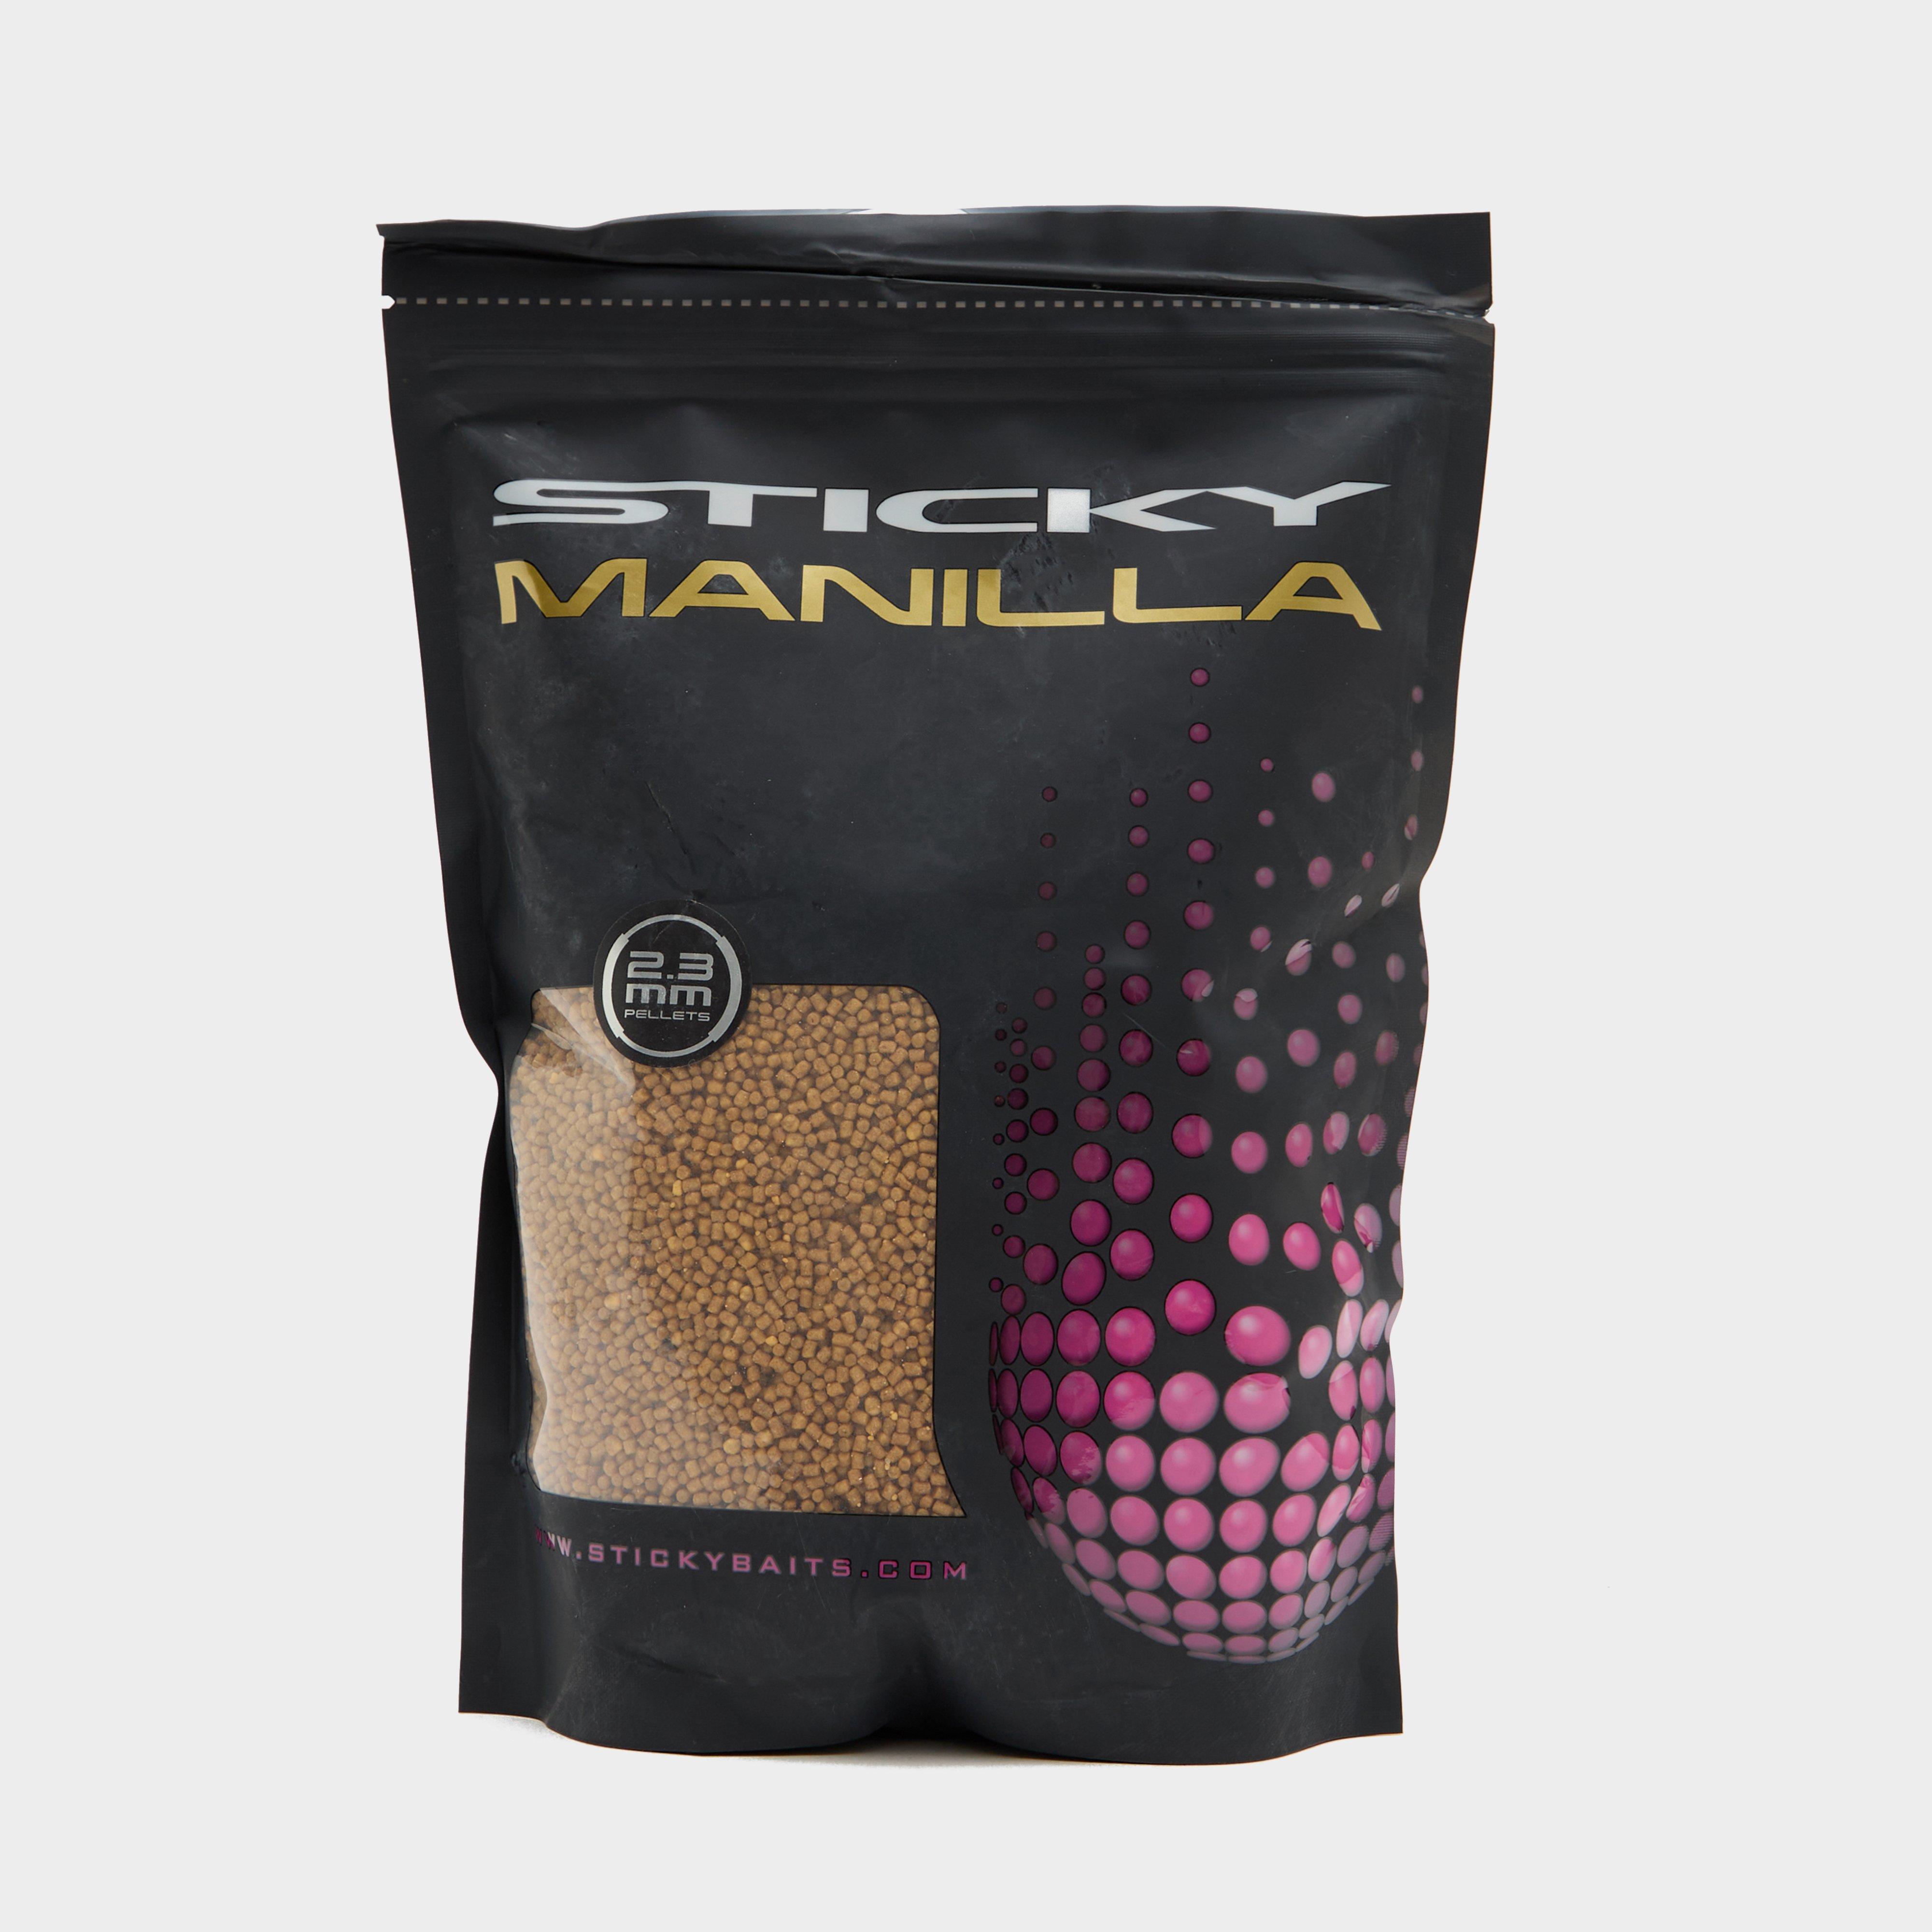 Sticky Baits Manilla Pellets 2.3mm 900g - Brown/900  Brown/900